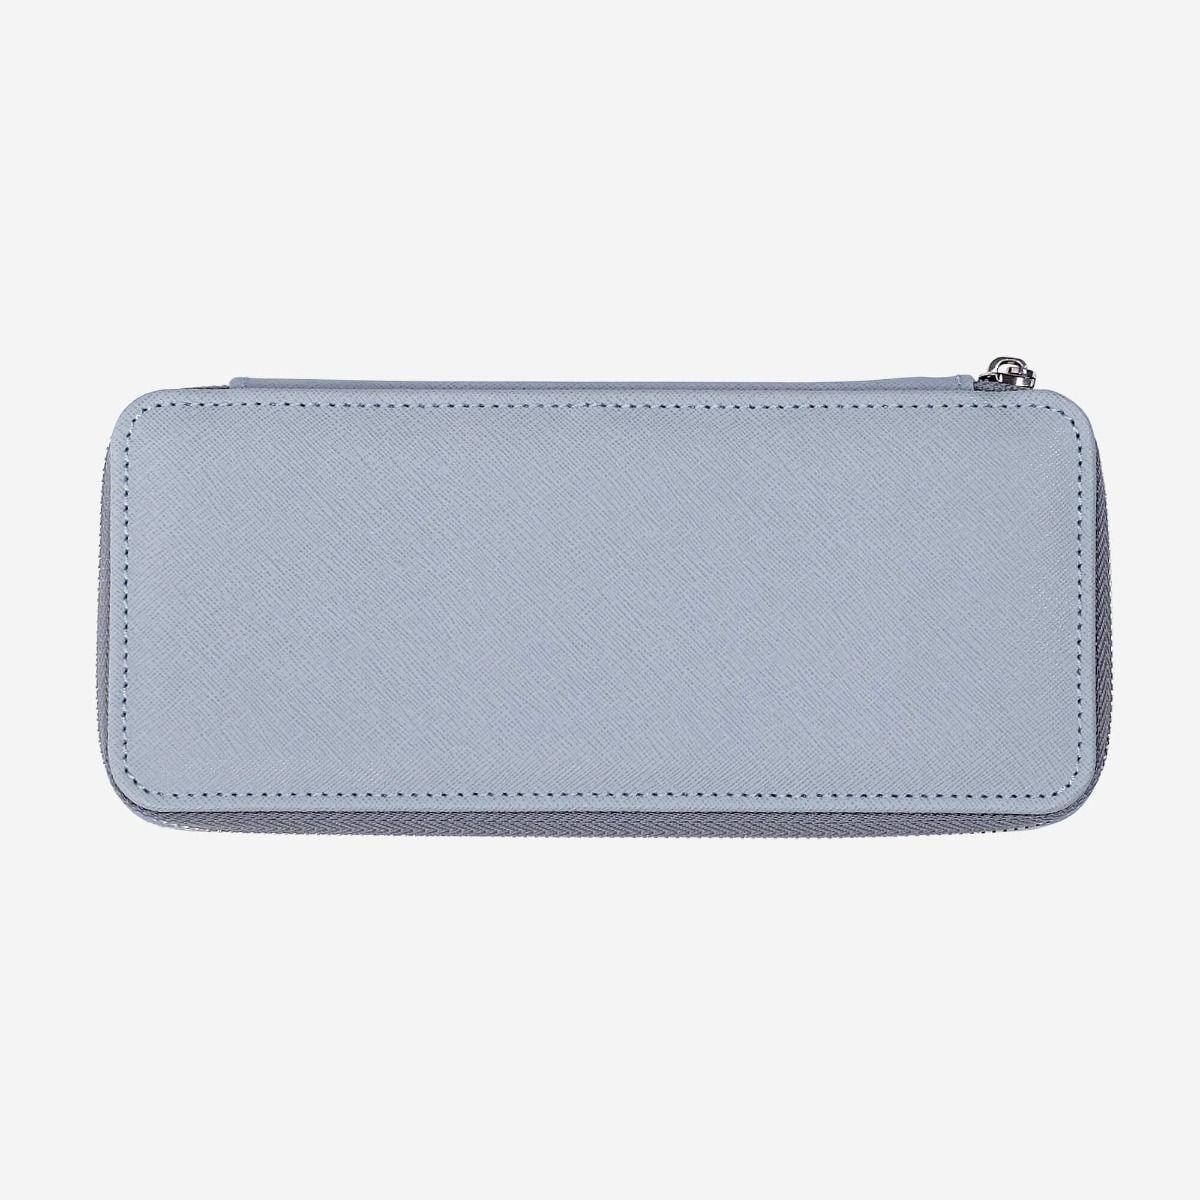 Stackers London Travel Jewellery Pouch Duo - Dusky Blue